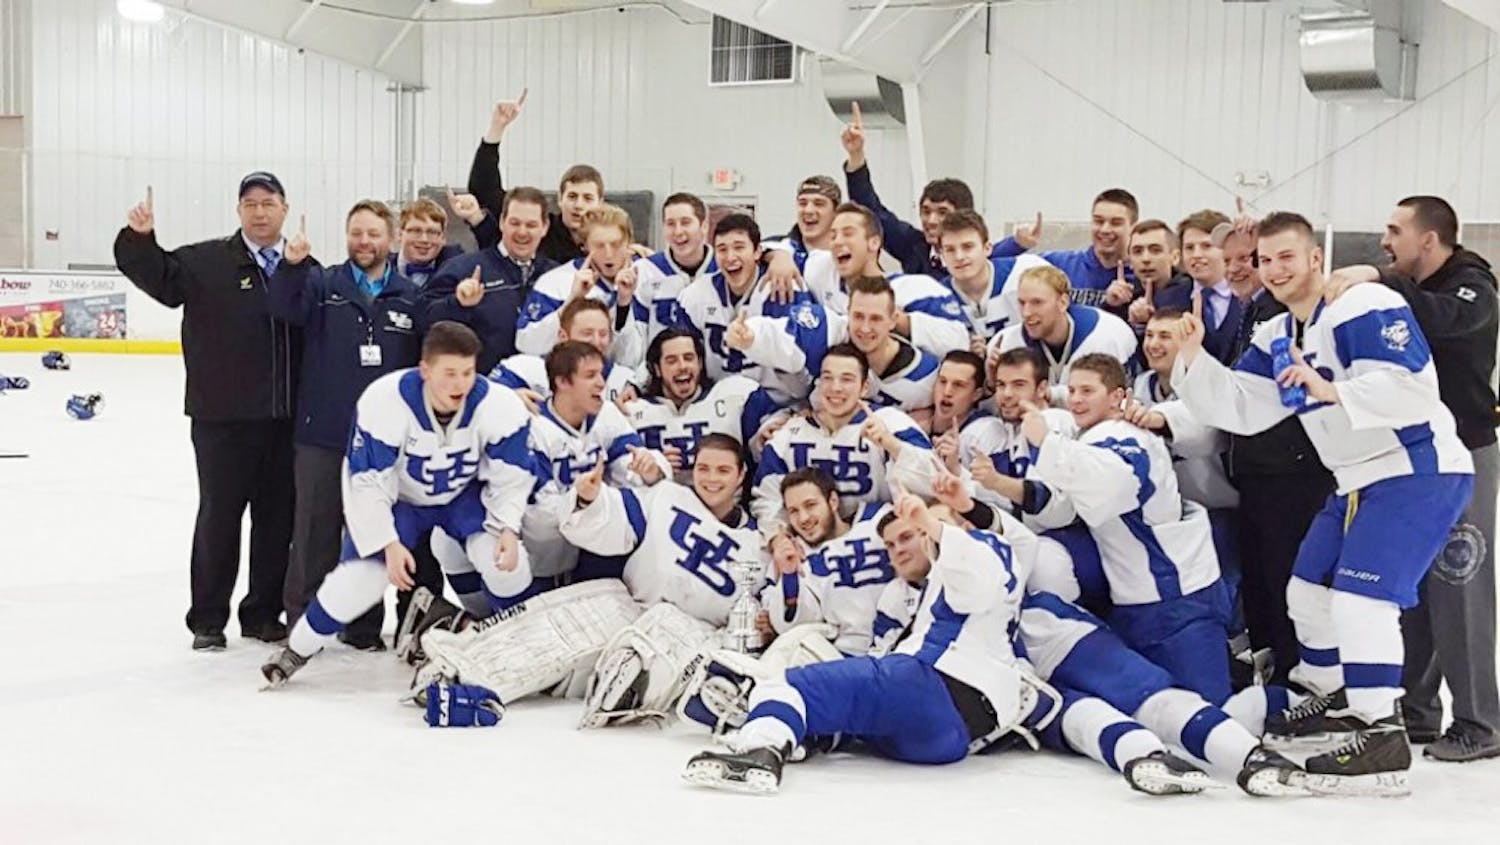 The D-III men’s hockey team celebrate a 4-2 victory over Penn State this past Sunday. The Bulls brought home their first-ever NCHA Championship this past weekend.